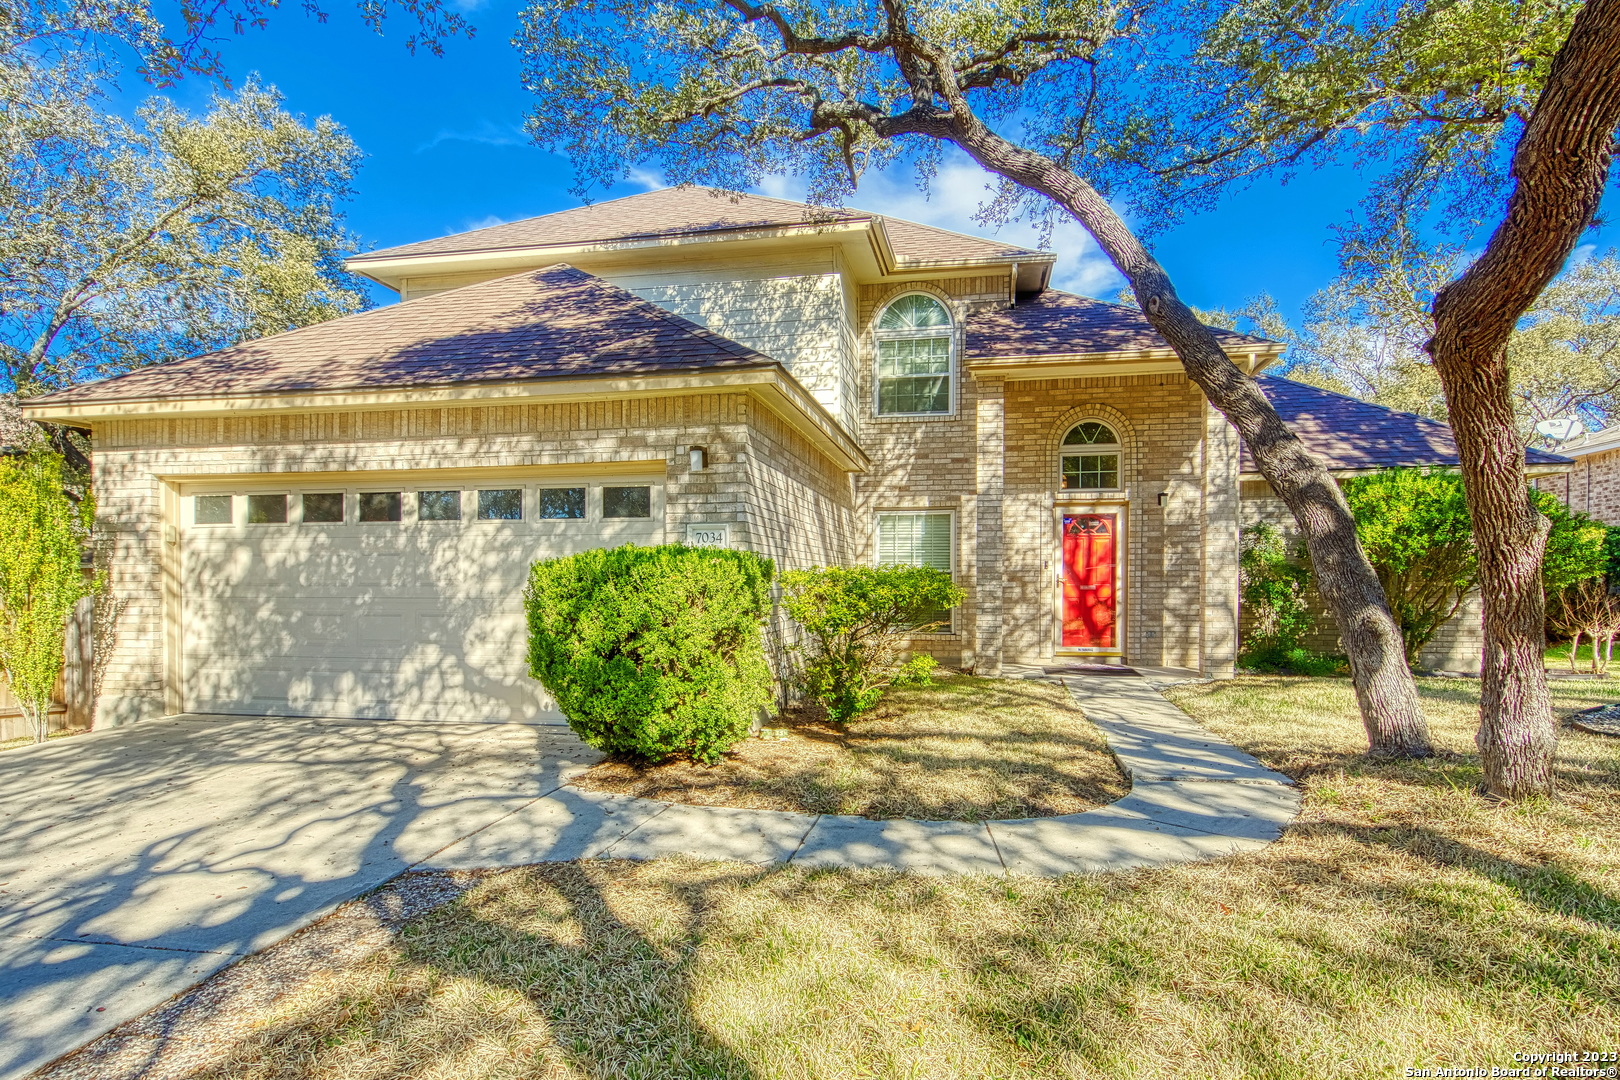 This home is centrally located to all your San Antonio needs and hotspots. Walking distance to community park playground and mini shopping centers. Minutes away from UTSA, Lacantera, 151 shopping, restaurants and of course H-E-B.  It is a perfect blank slate and aggressively priced with one of the nicest front yards in the neighborhood. You will enjoy a spacious backyard with an amazing covered screened in patio for outdoor relaxation.   This four-bedroom home will be perfect for any family or someone looking to update an amazing home to their liking.      Schedule your showing NOW because it will not last long